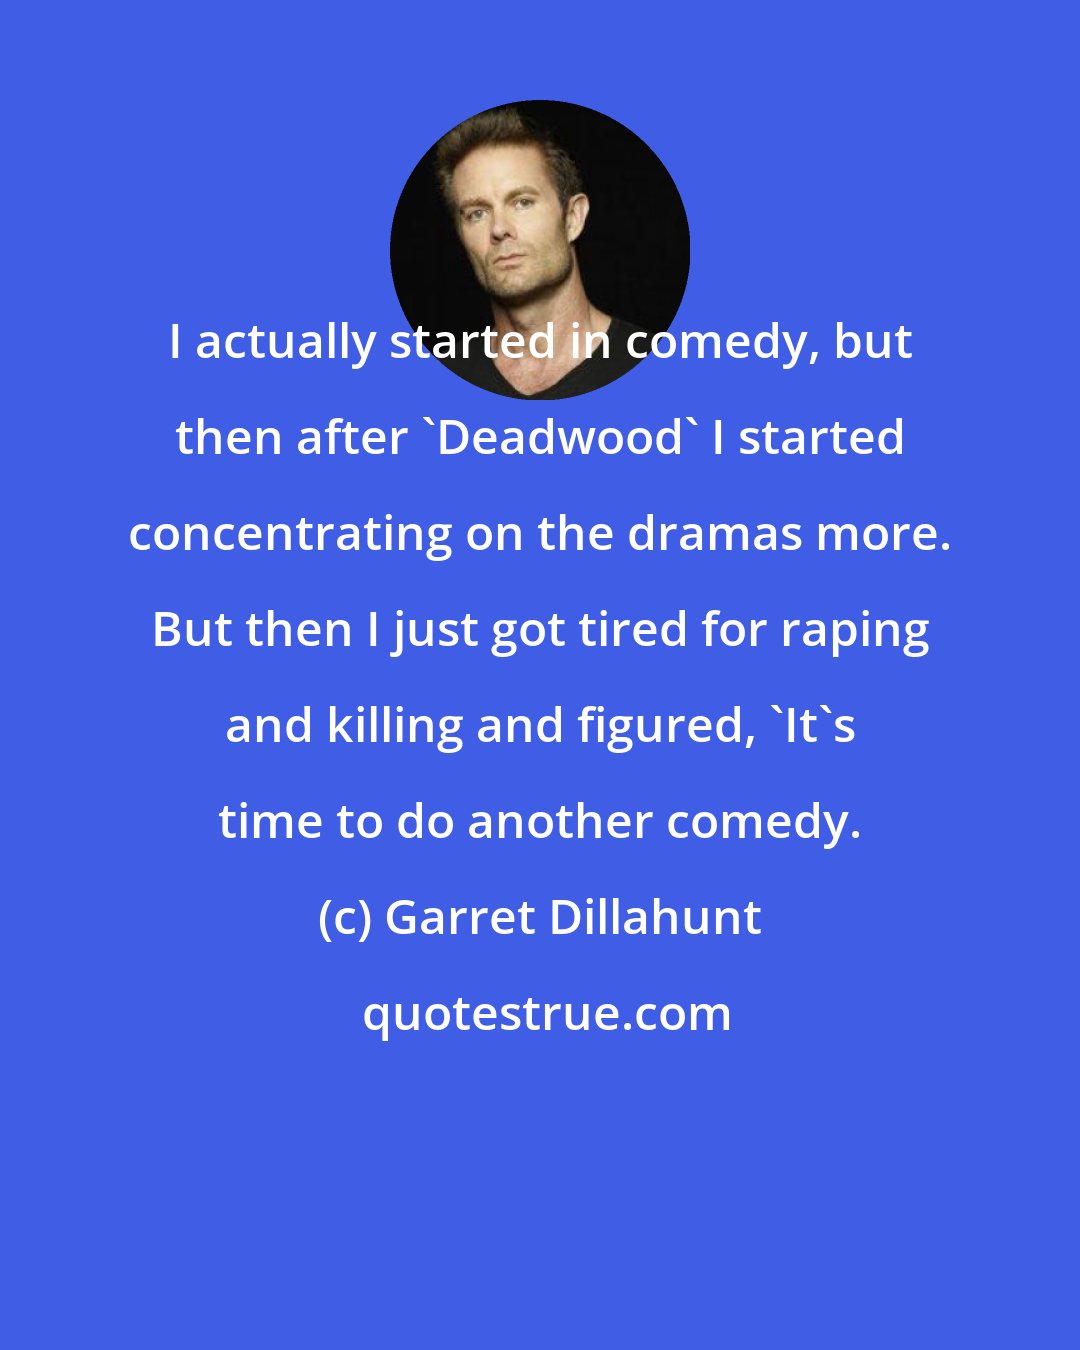 Garret Dillahunt: I actually started in comedy, but then after 'Deadwood' I started concentrating on the dramas more. But then I just got tired for raping and killing and figured, 'It's time to do another comedy.